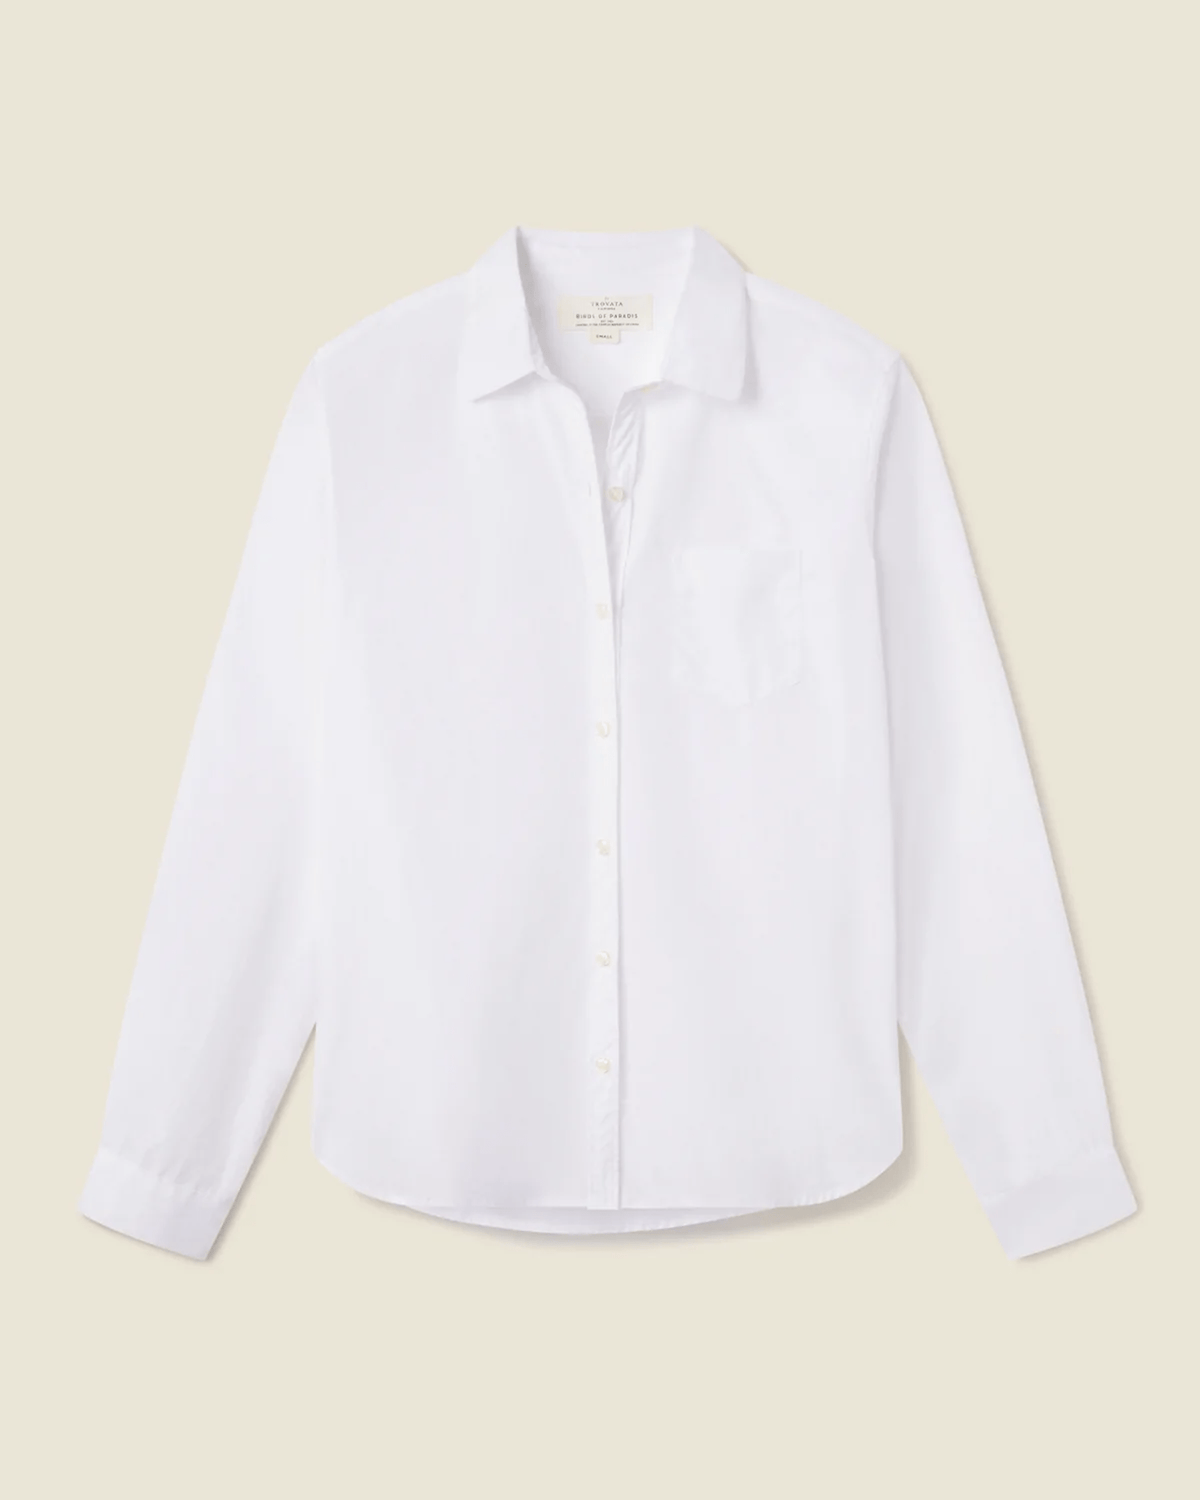 Trovata Birds of Paradis Clothing Grace Classic Shirt in White